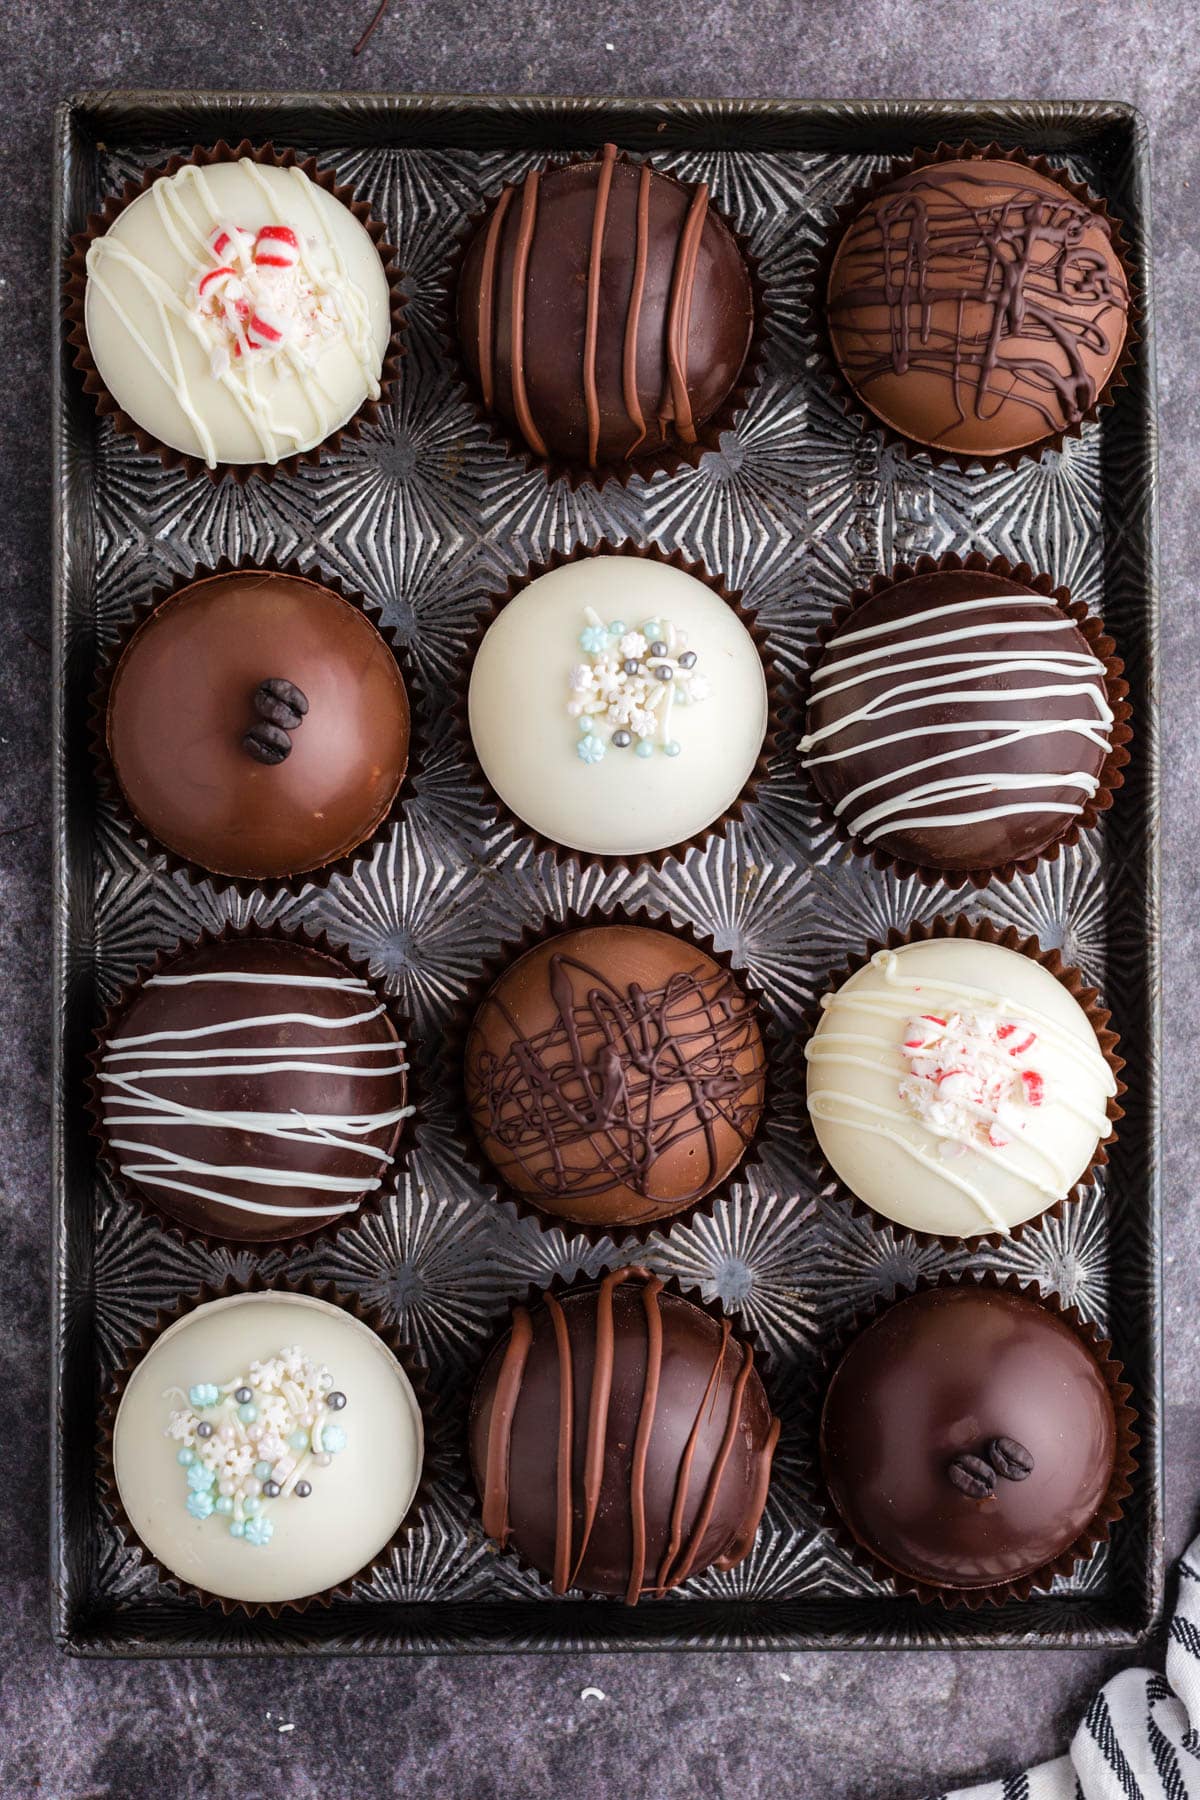 Assorted hot chocolate bombs on a metal tray, striped linen, on a dark marble countertop.